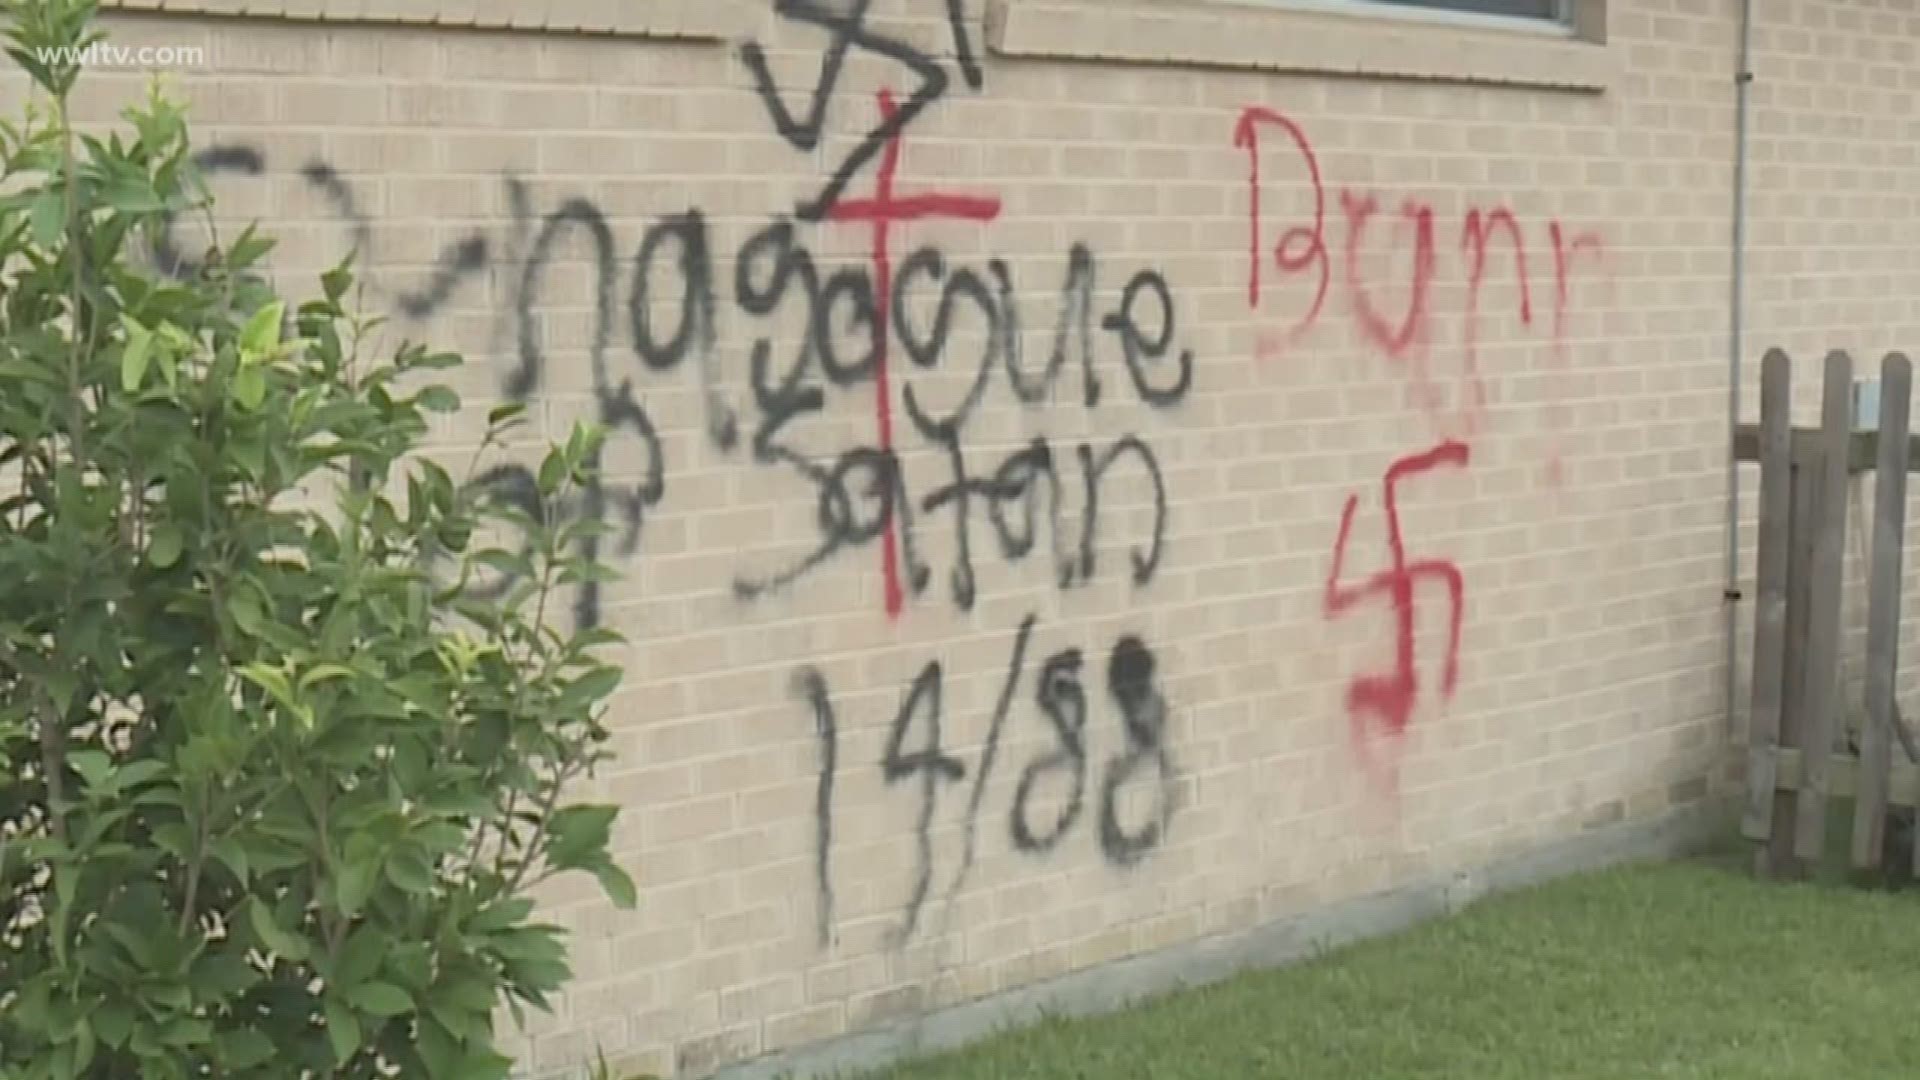 On the wall, you can see swastika symbols in red and black with the words "synagogue of satan" and the numbers 14/88 next to it.